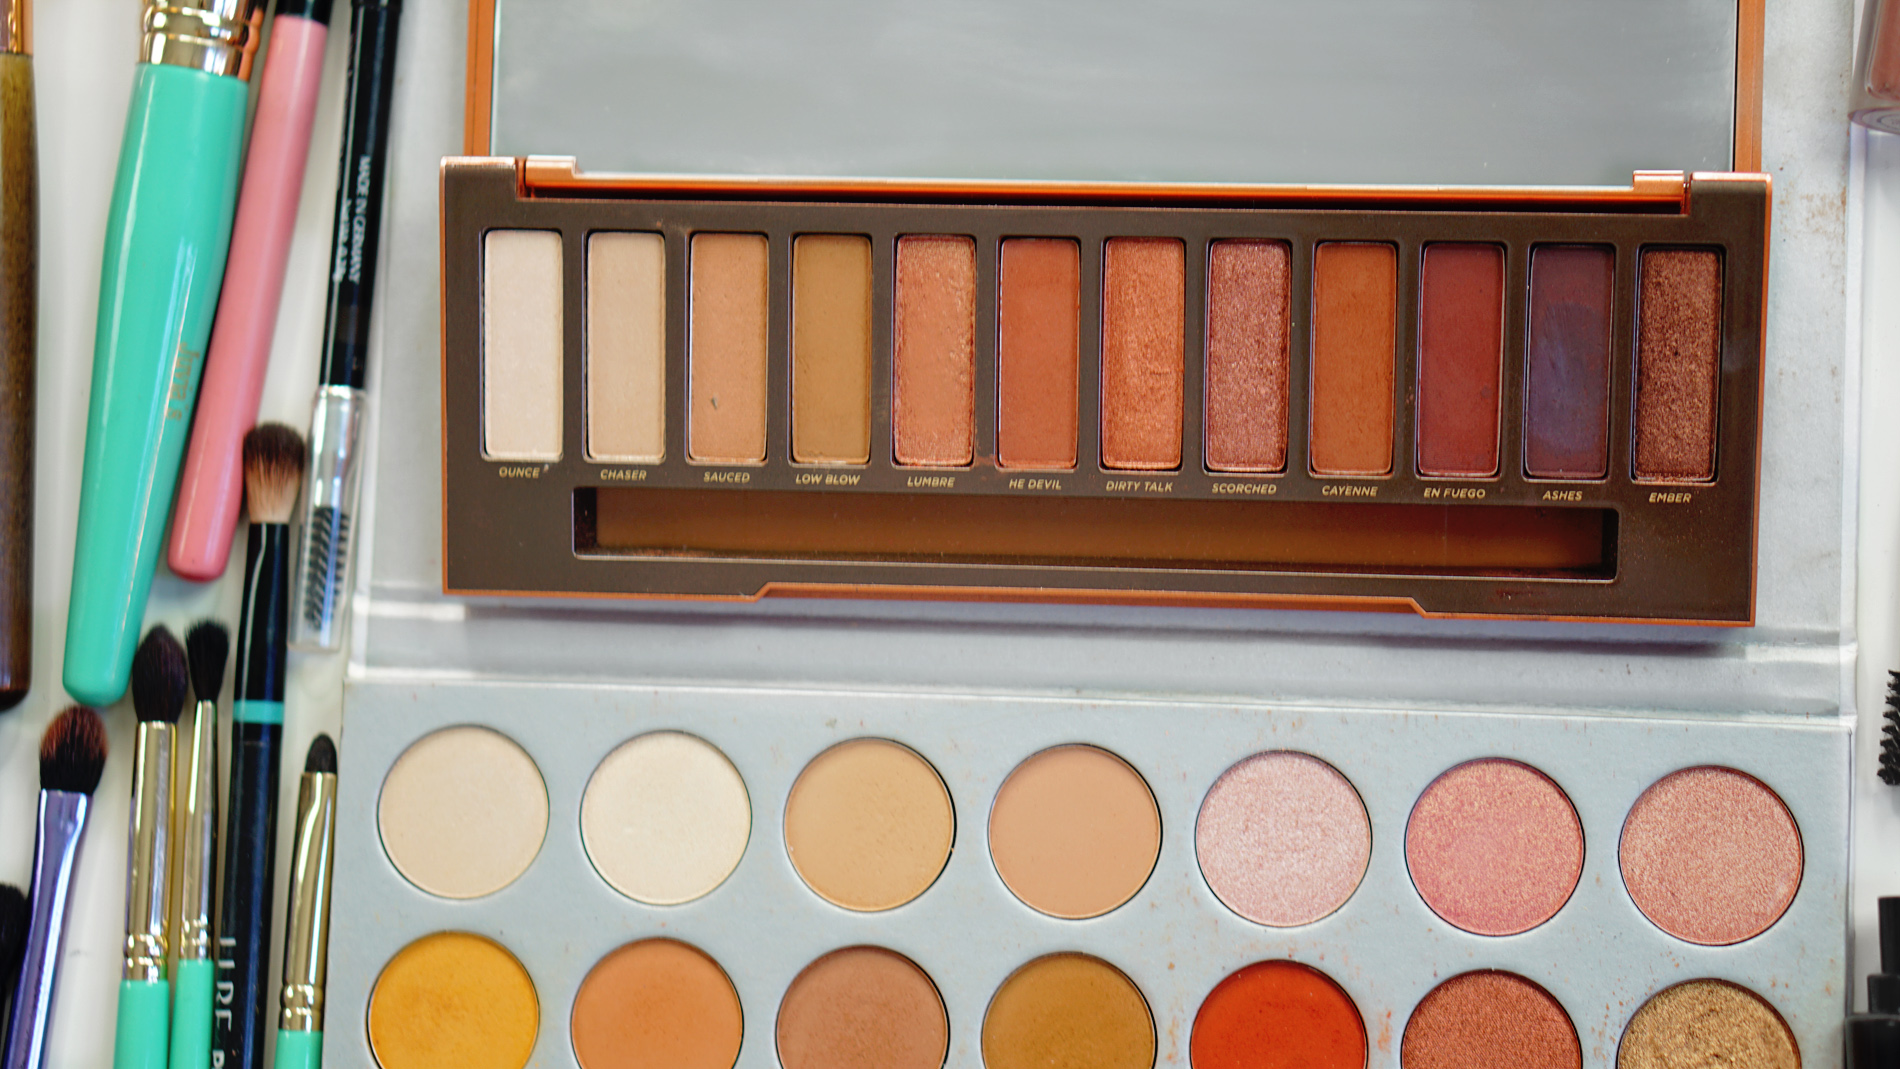 Urban decay naked heat vs morphe jaclyn hill dupe